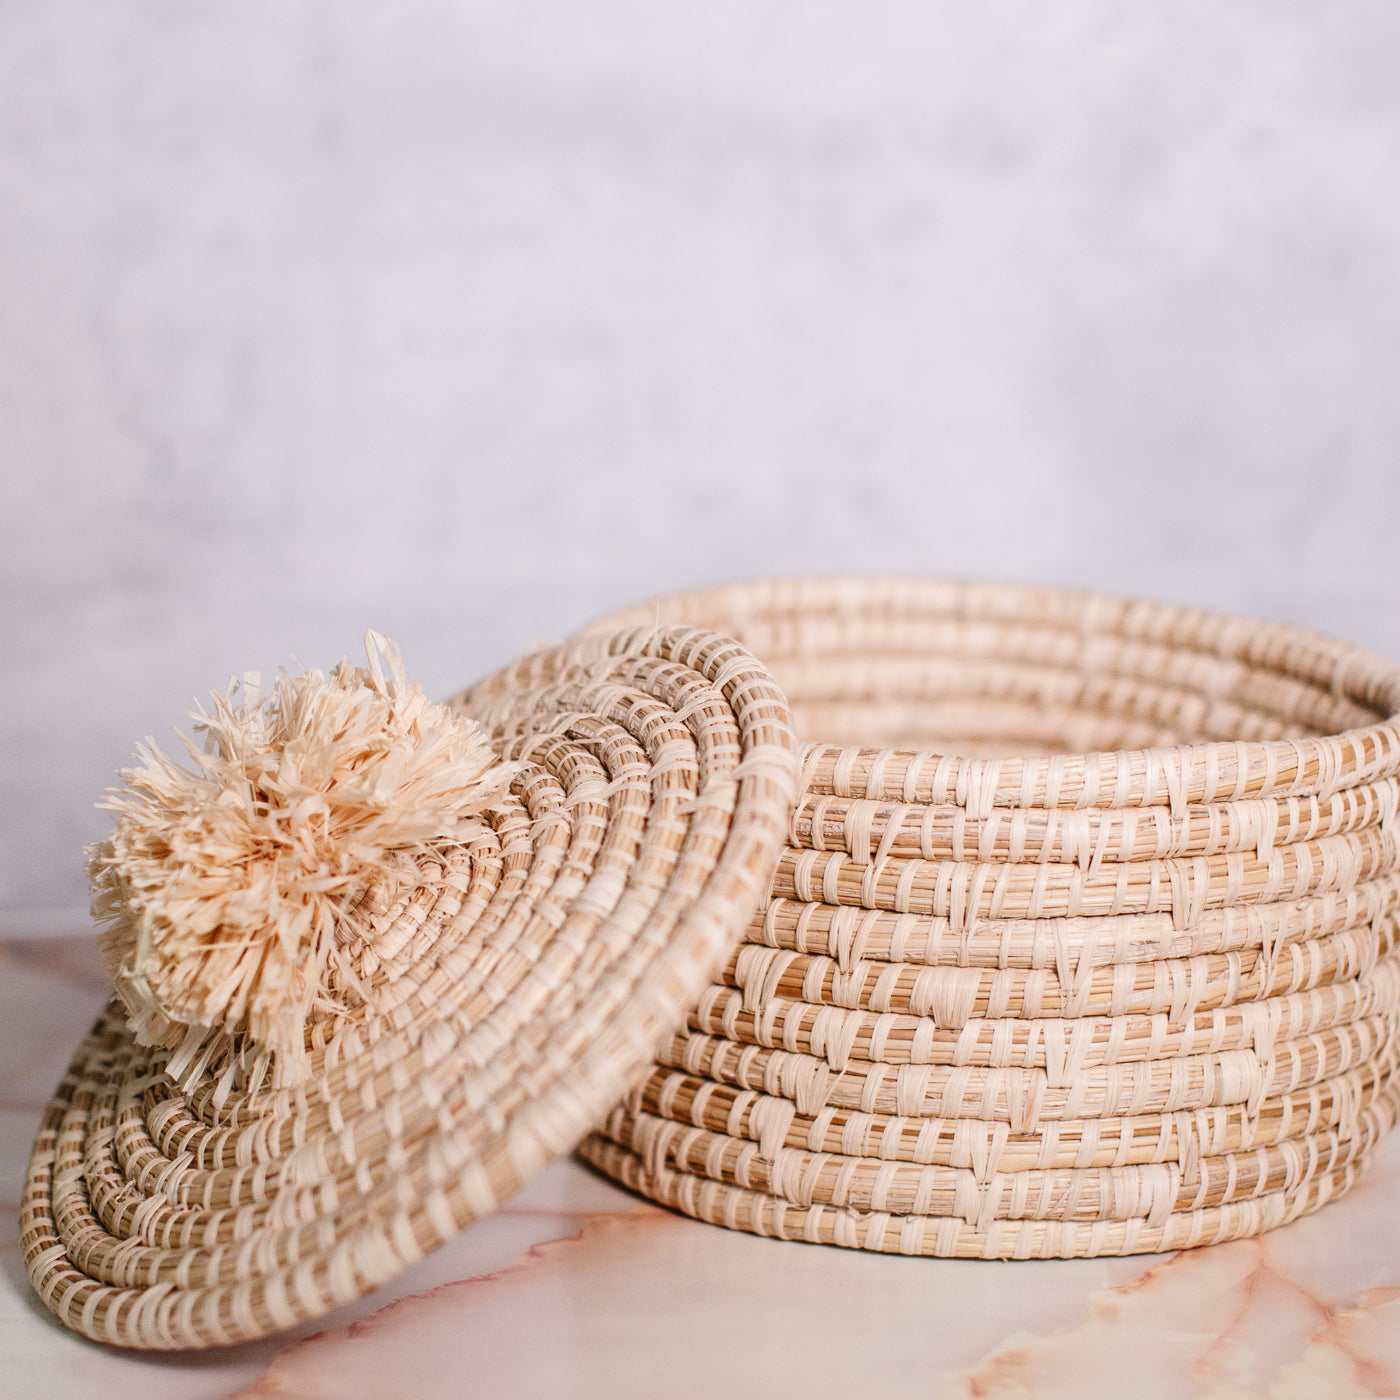 JustOne's tan basket and lid with a tan pompom handle, handcrafted in Uganda